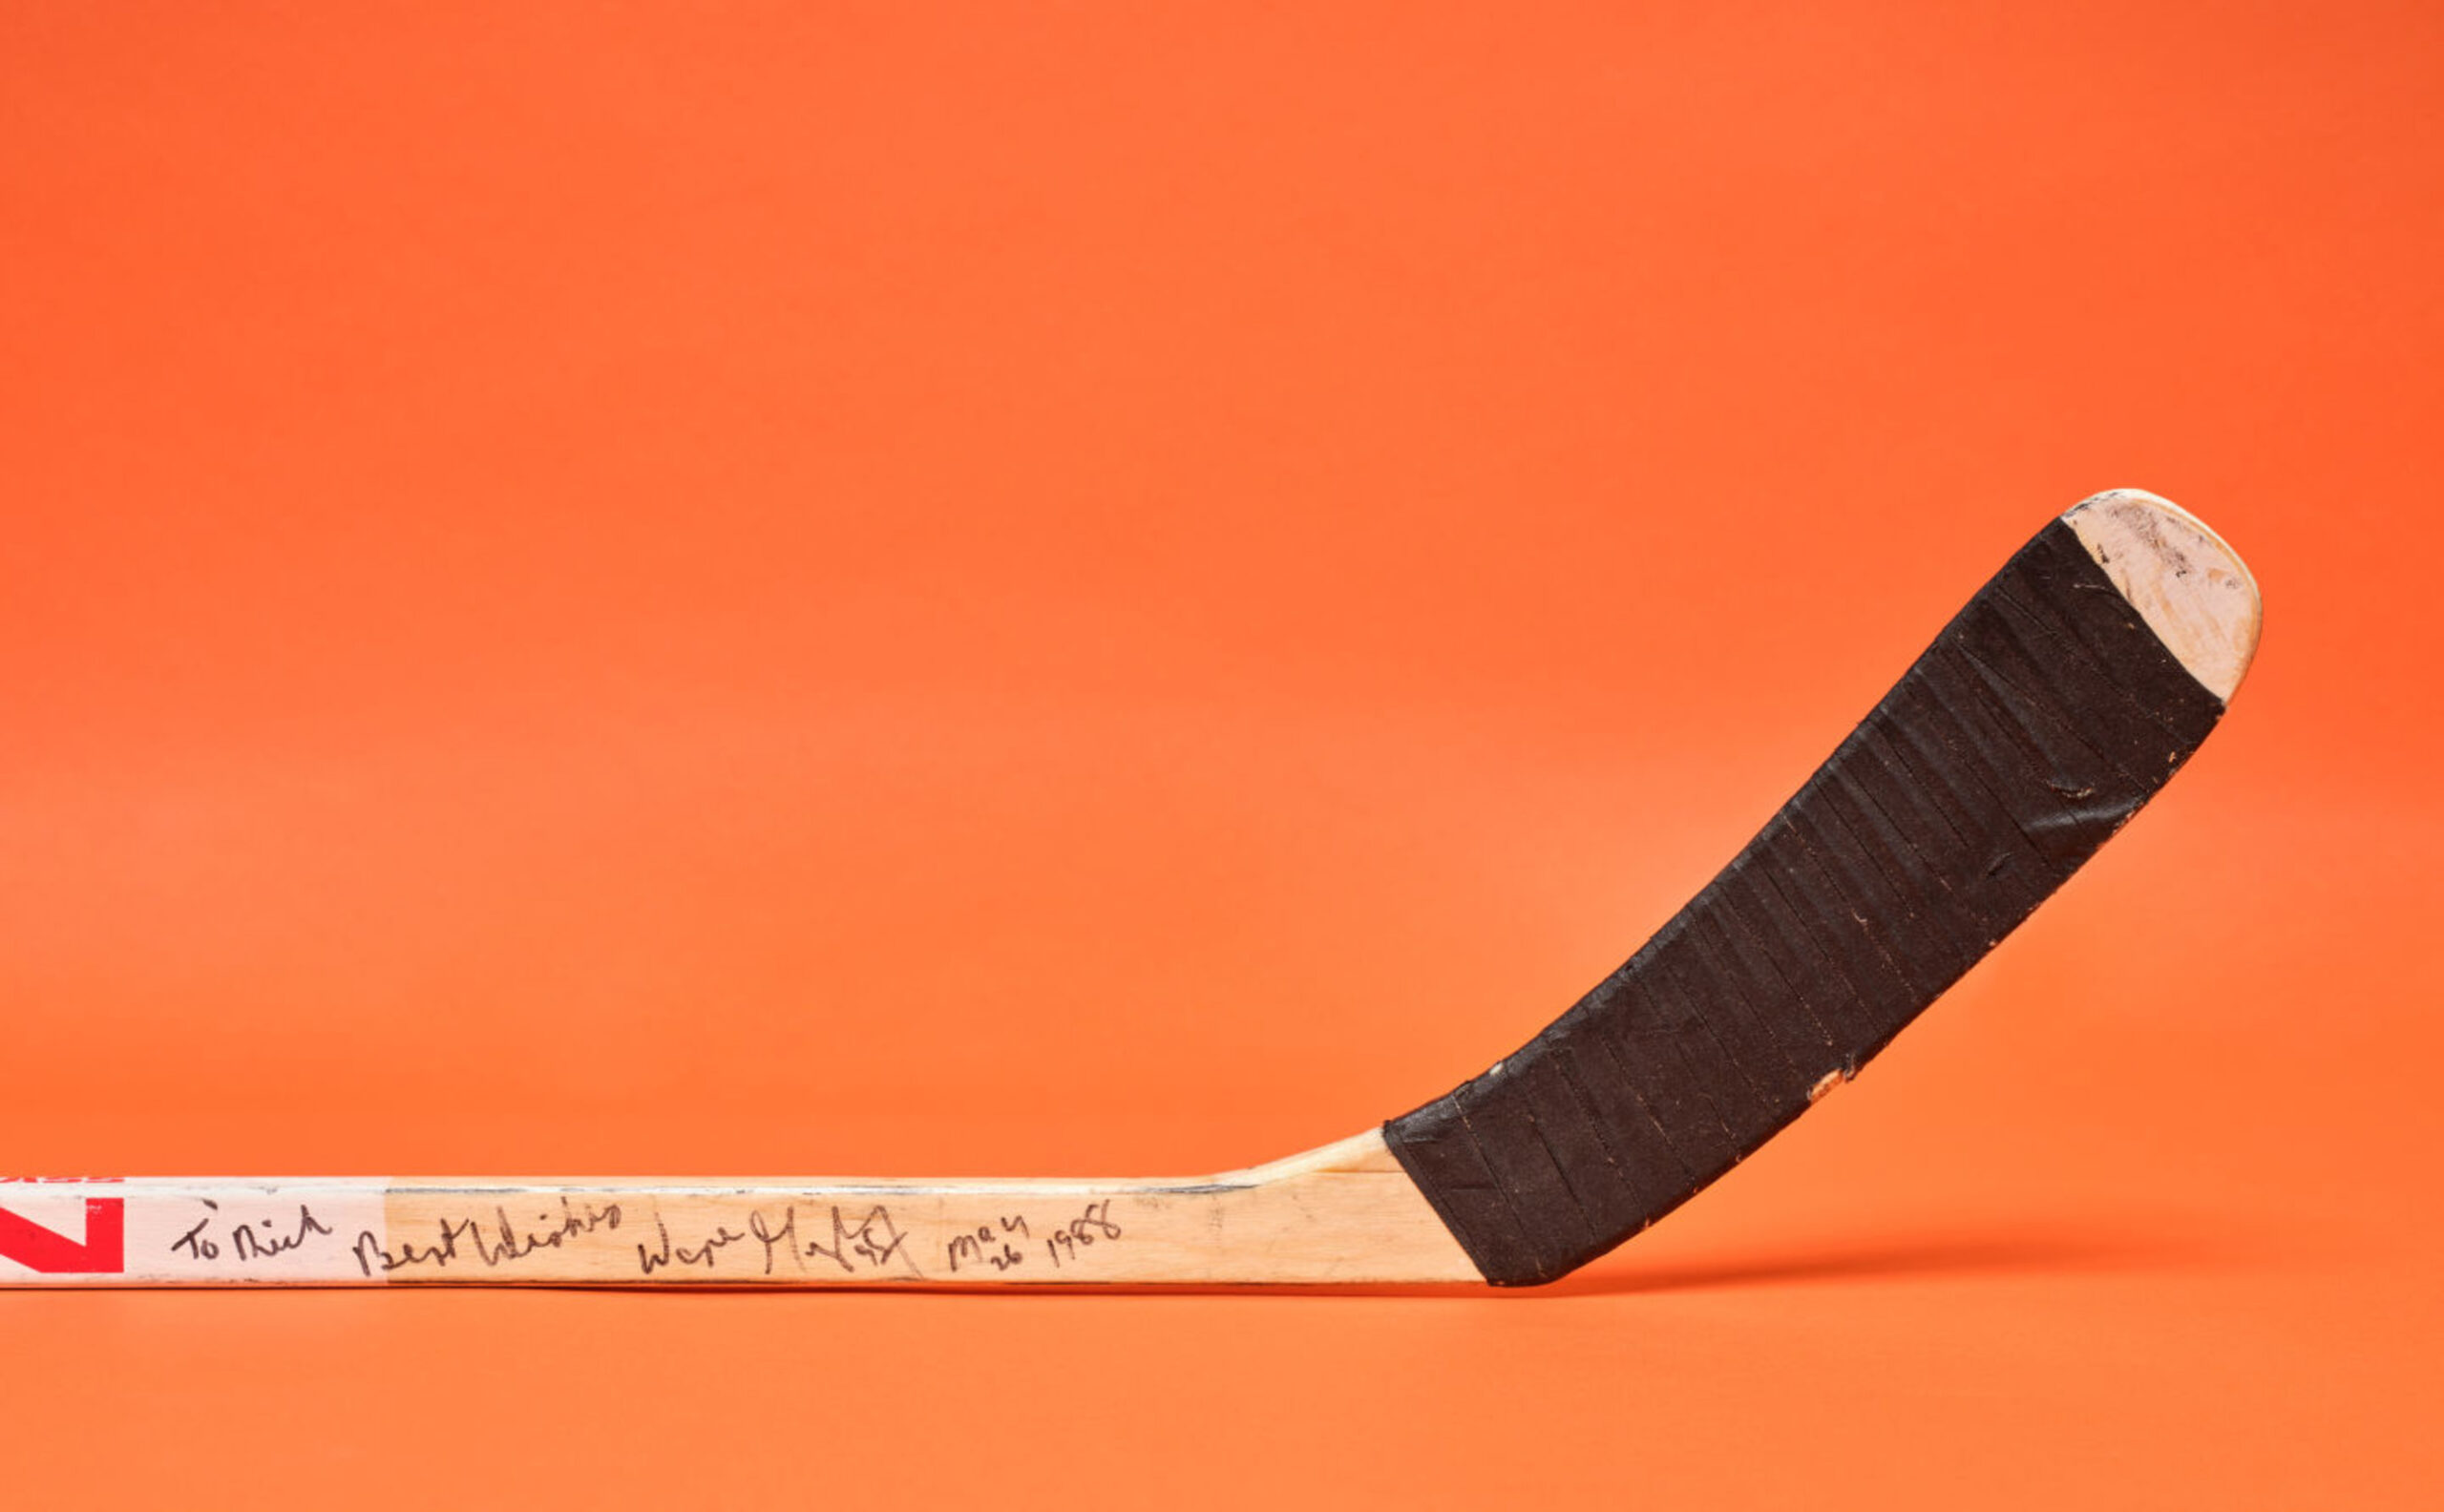 Game-used Wayne Gretzky hockey stick from 1988 Stanley Cup Finals